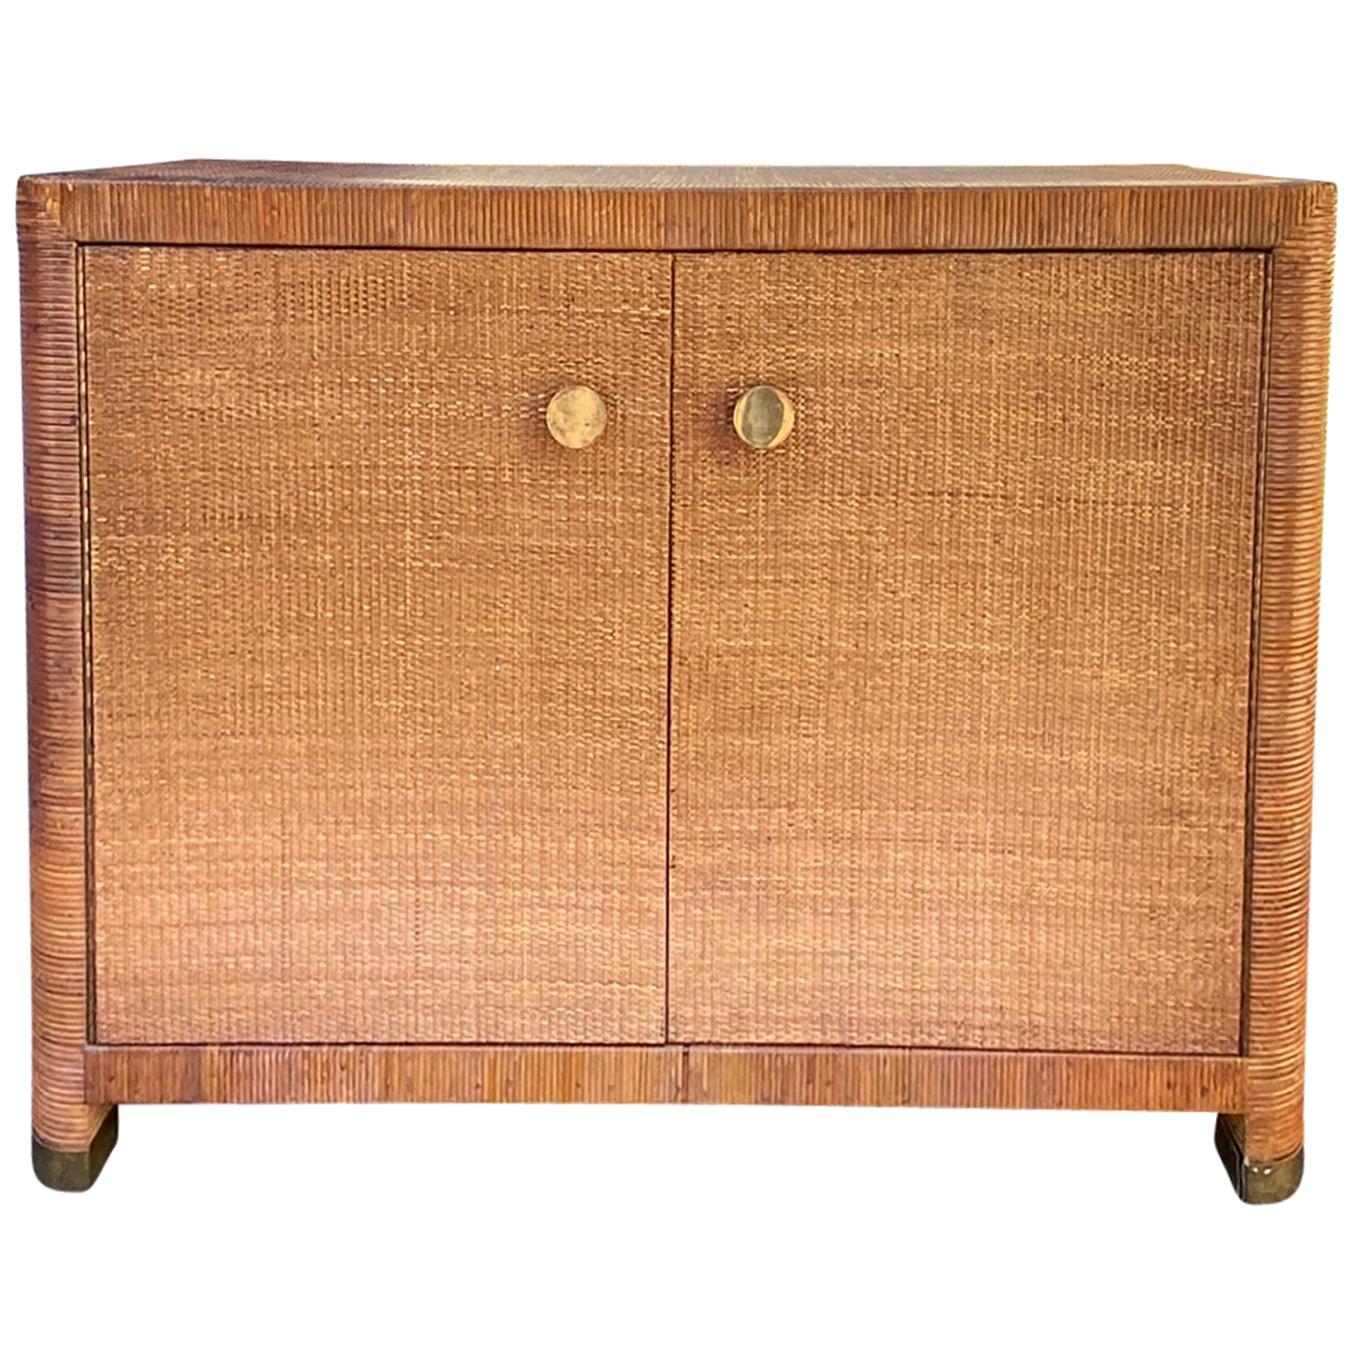 Bielecky Brothers Art Deco Style Rattan, Cane, Wicker Two-Door Cabinet, Labeled